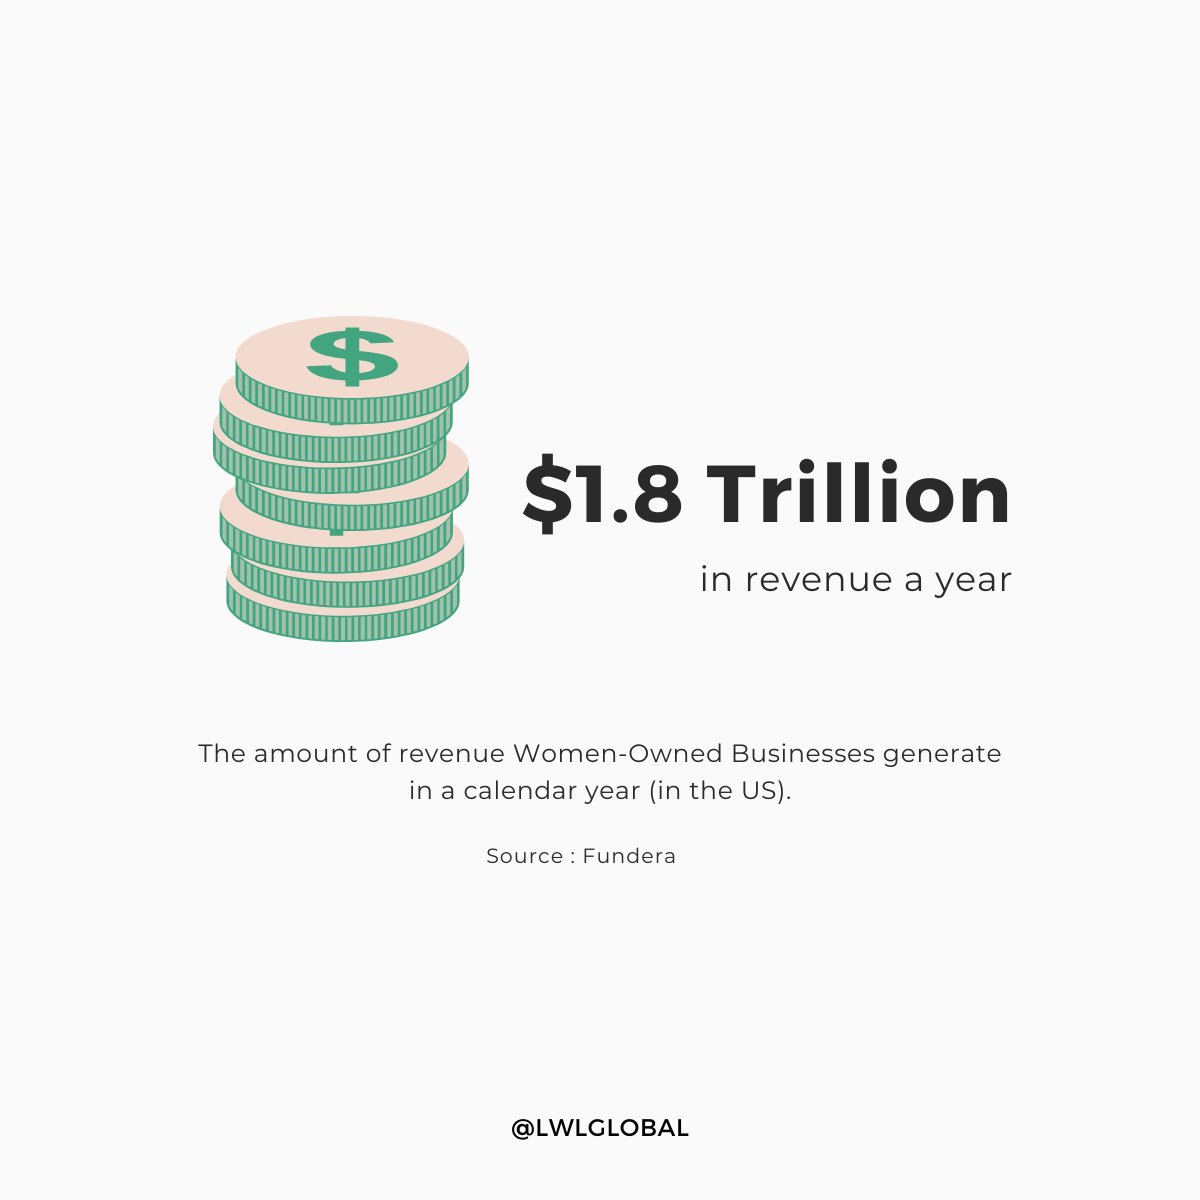 1.8 Trillion Dollars is the amount of revenue Women-Owned Businesses generate in a calendar year (in the US). You go, #womenentrepreneurs 🎉 Want more women-owned business stats? Visit fundera.com/resources/wome… via @fundera #ladieswholaunch #entrepreneur #womeninbusiness